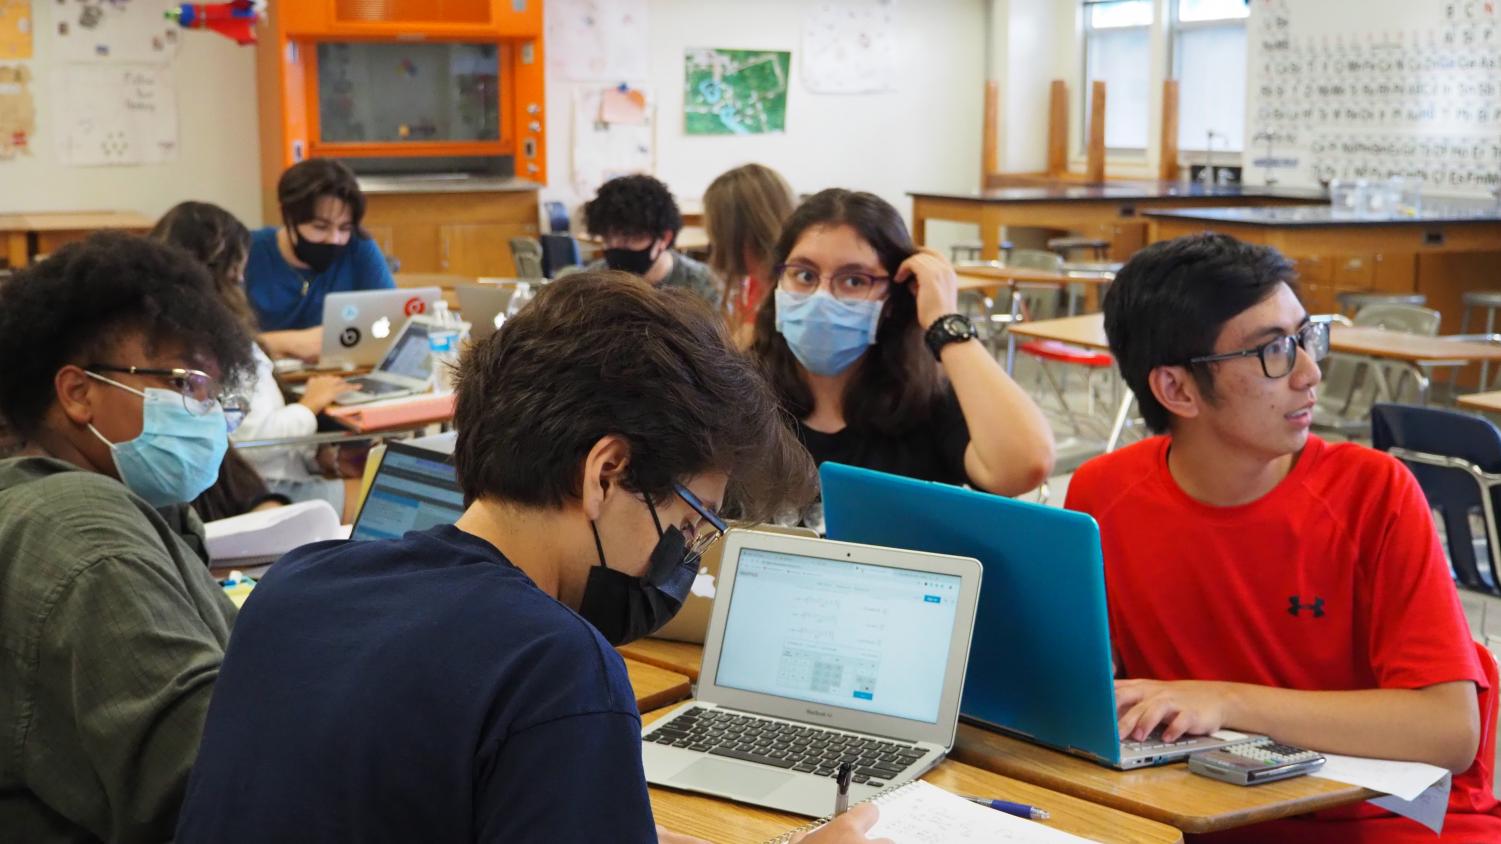 Students work on science class assignments on Wednesday, August 18, 2021, EPISD imposed a mask mandate on August 19 following citywide mandate and TEA guidance.